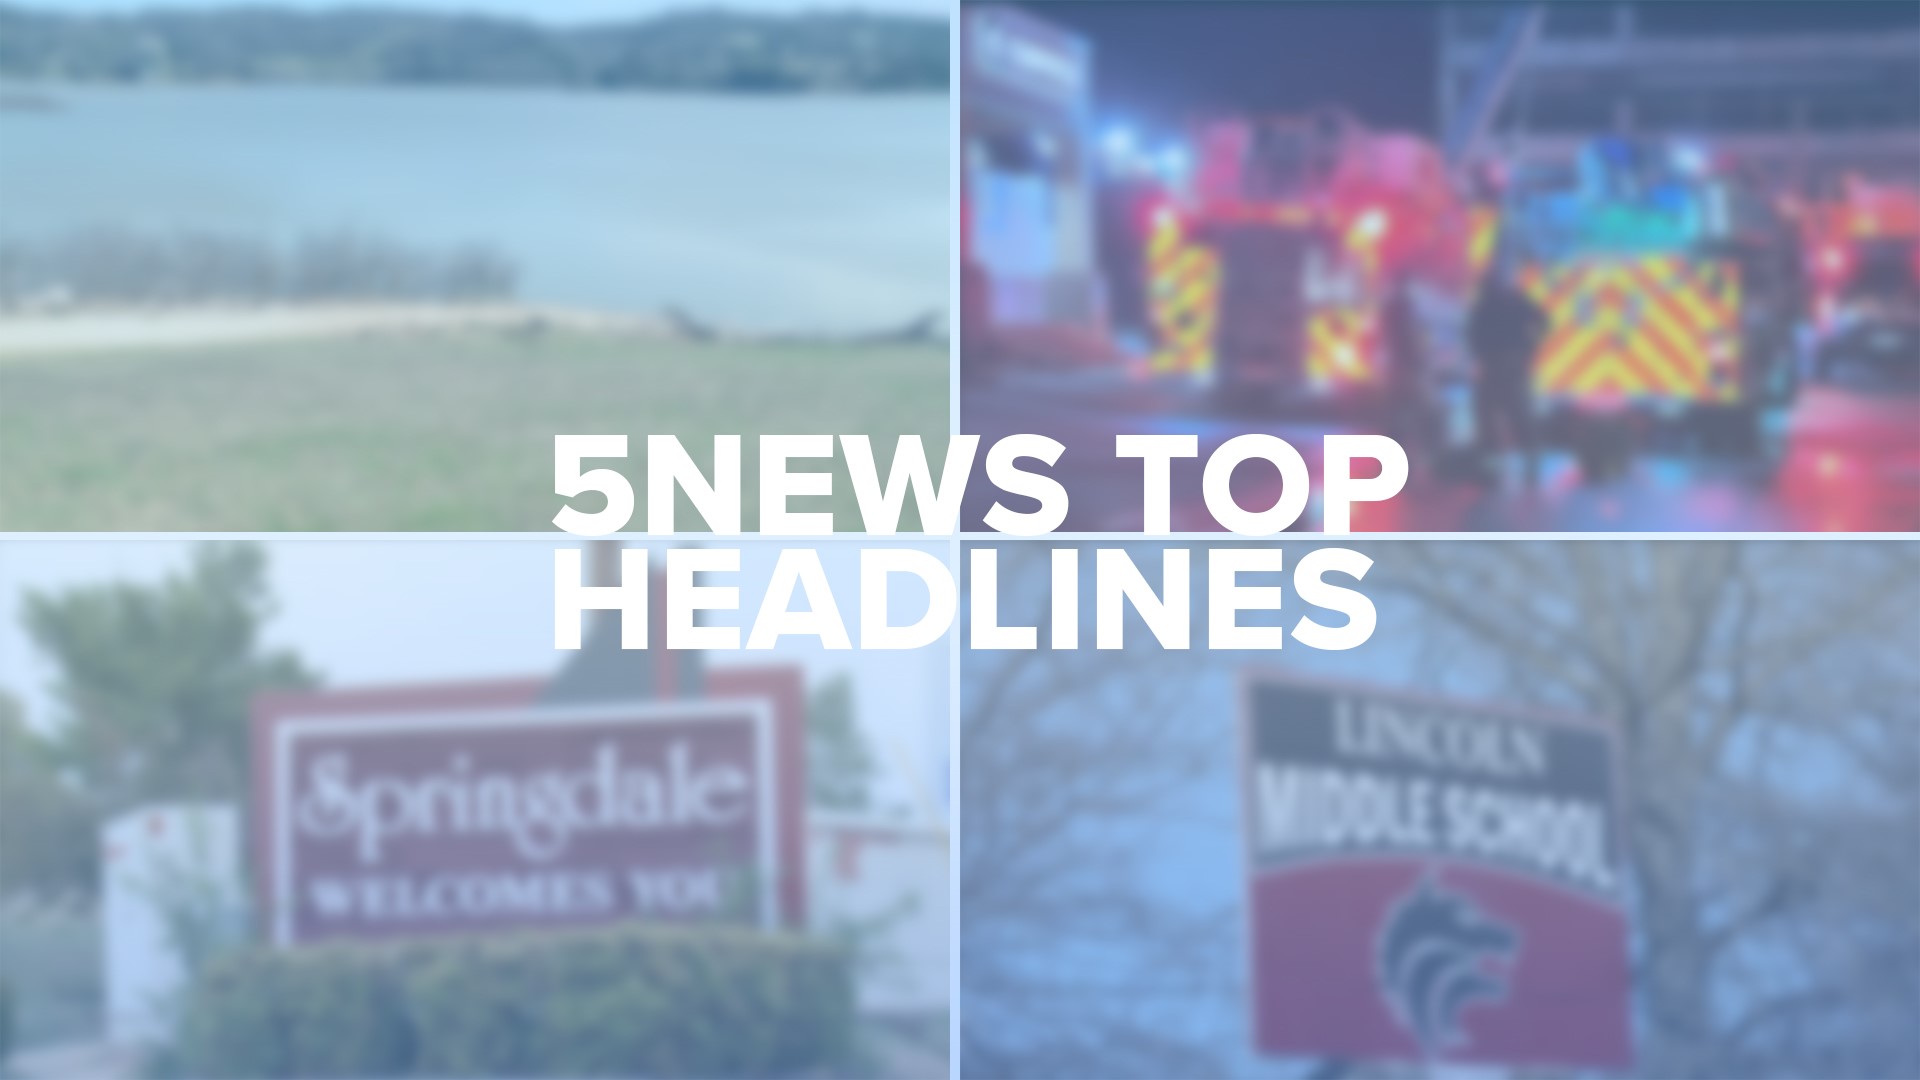 Take a look at some of today's top headlines for local news across our area!